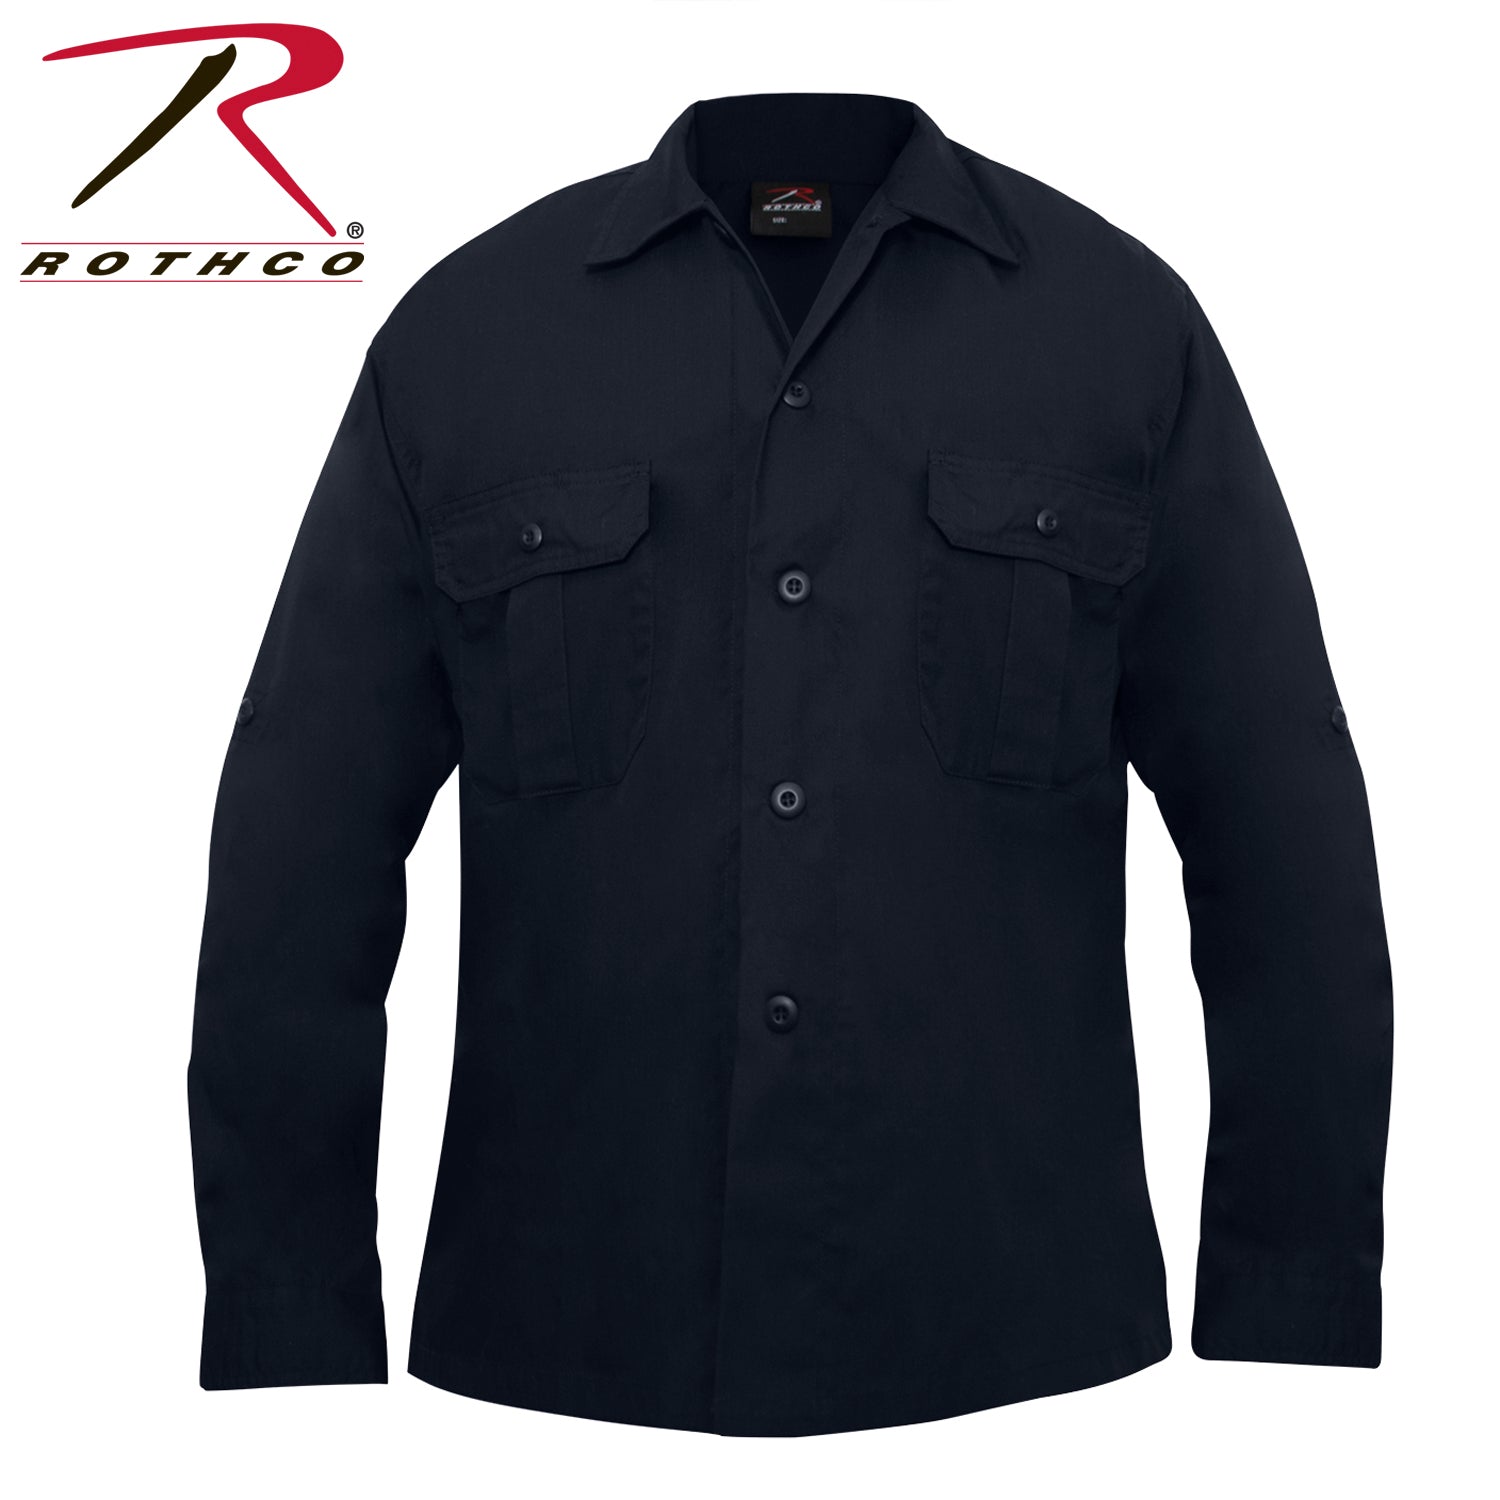 Rothco Lightweight Tactical Shirt - Tactical Choice Plus